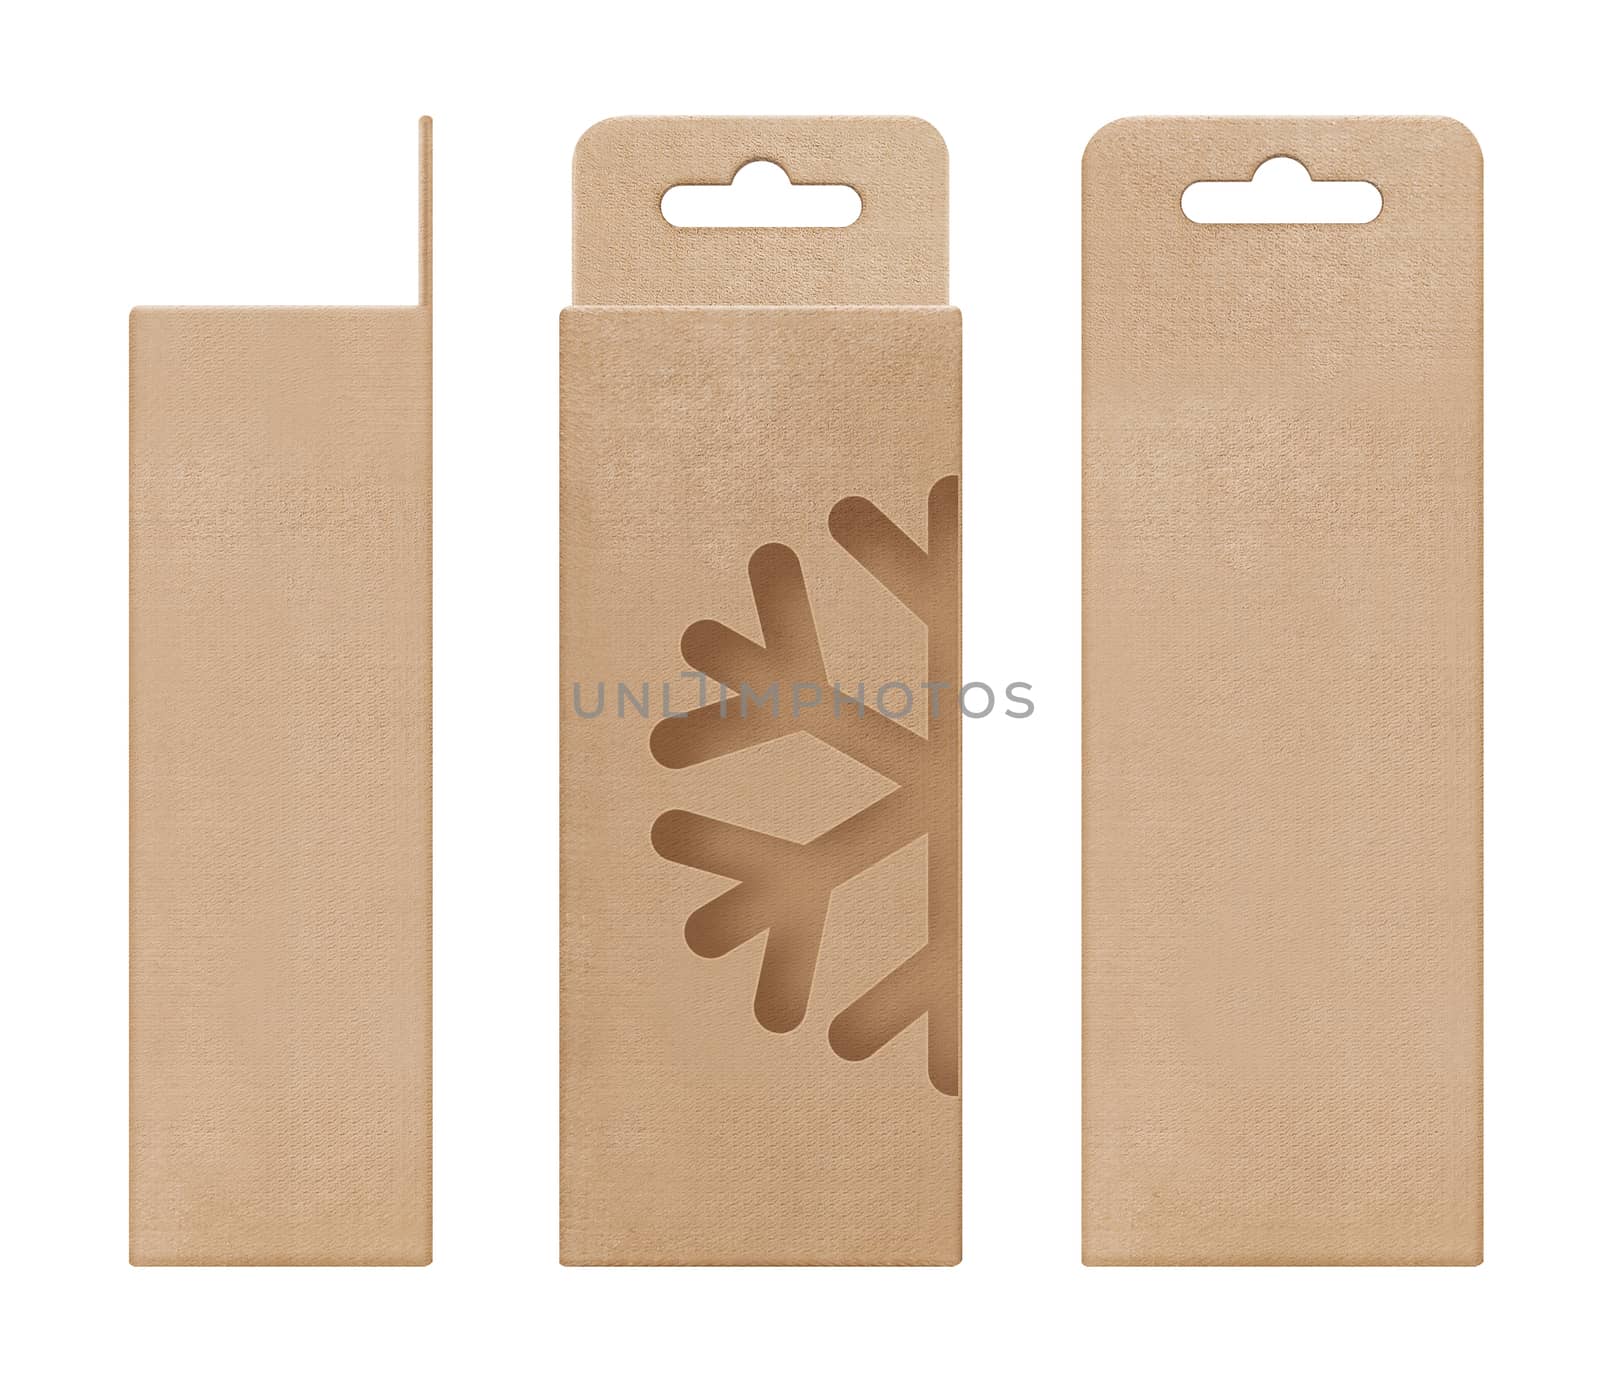 box, packaging, box brown for hanging cut out window Ice snow shape open blank template for design product package